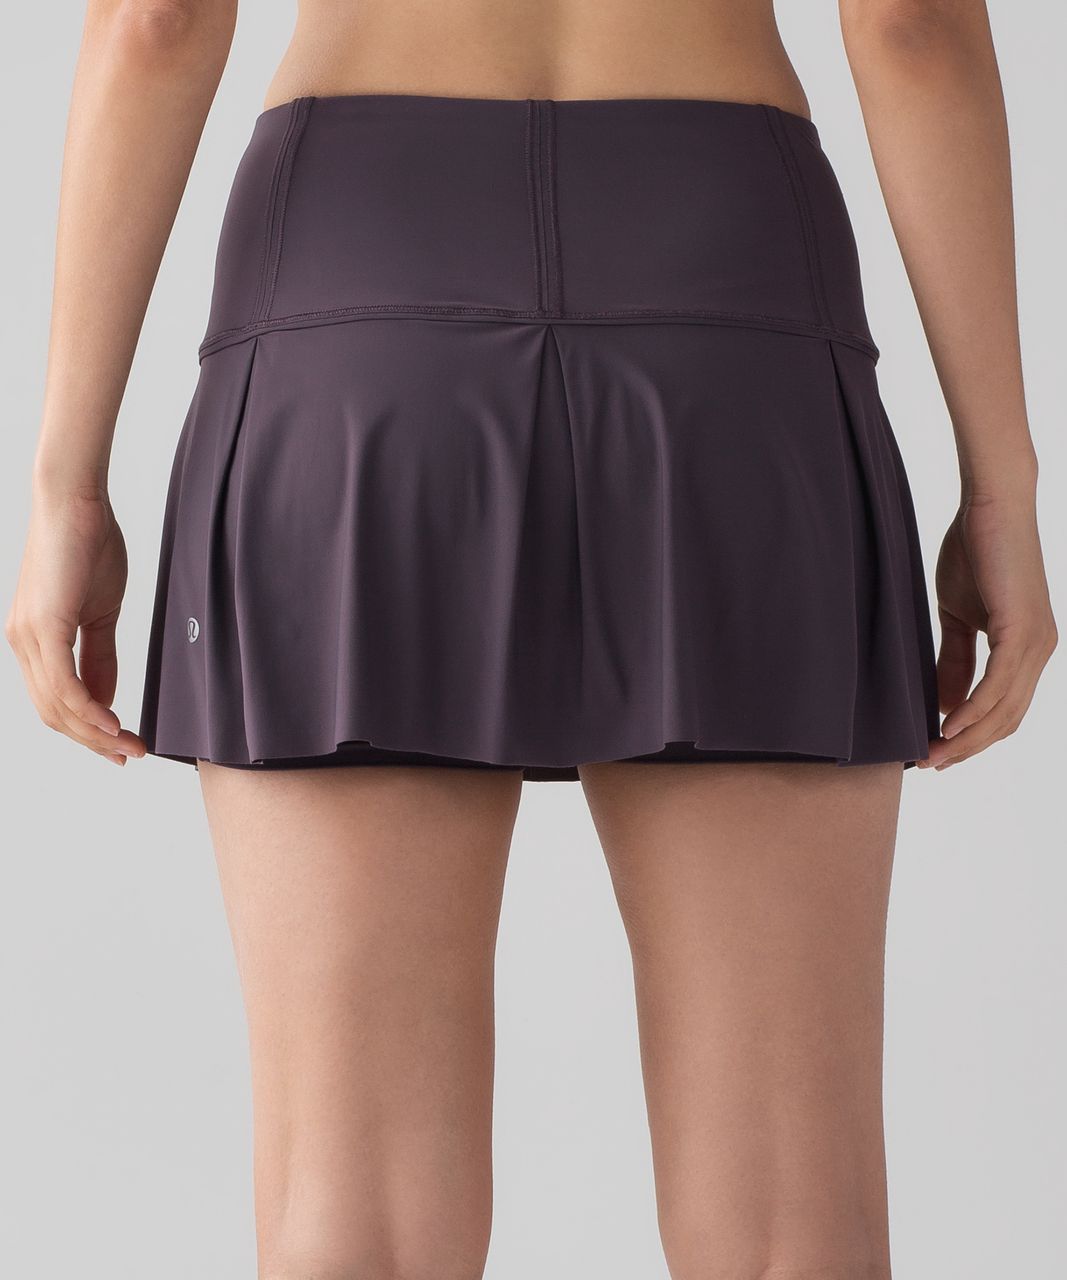 lost in pace skirt